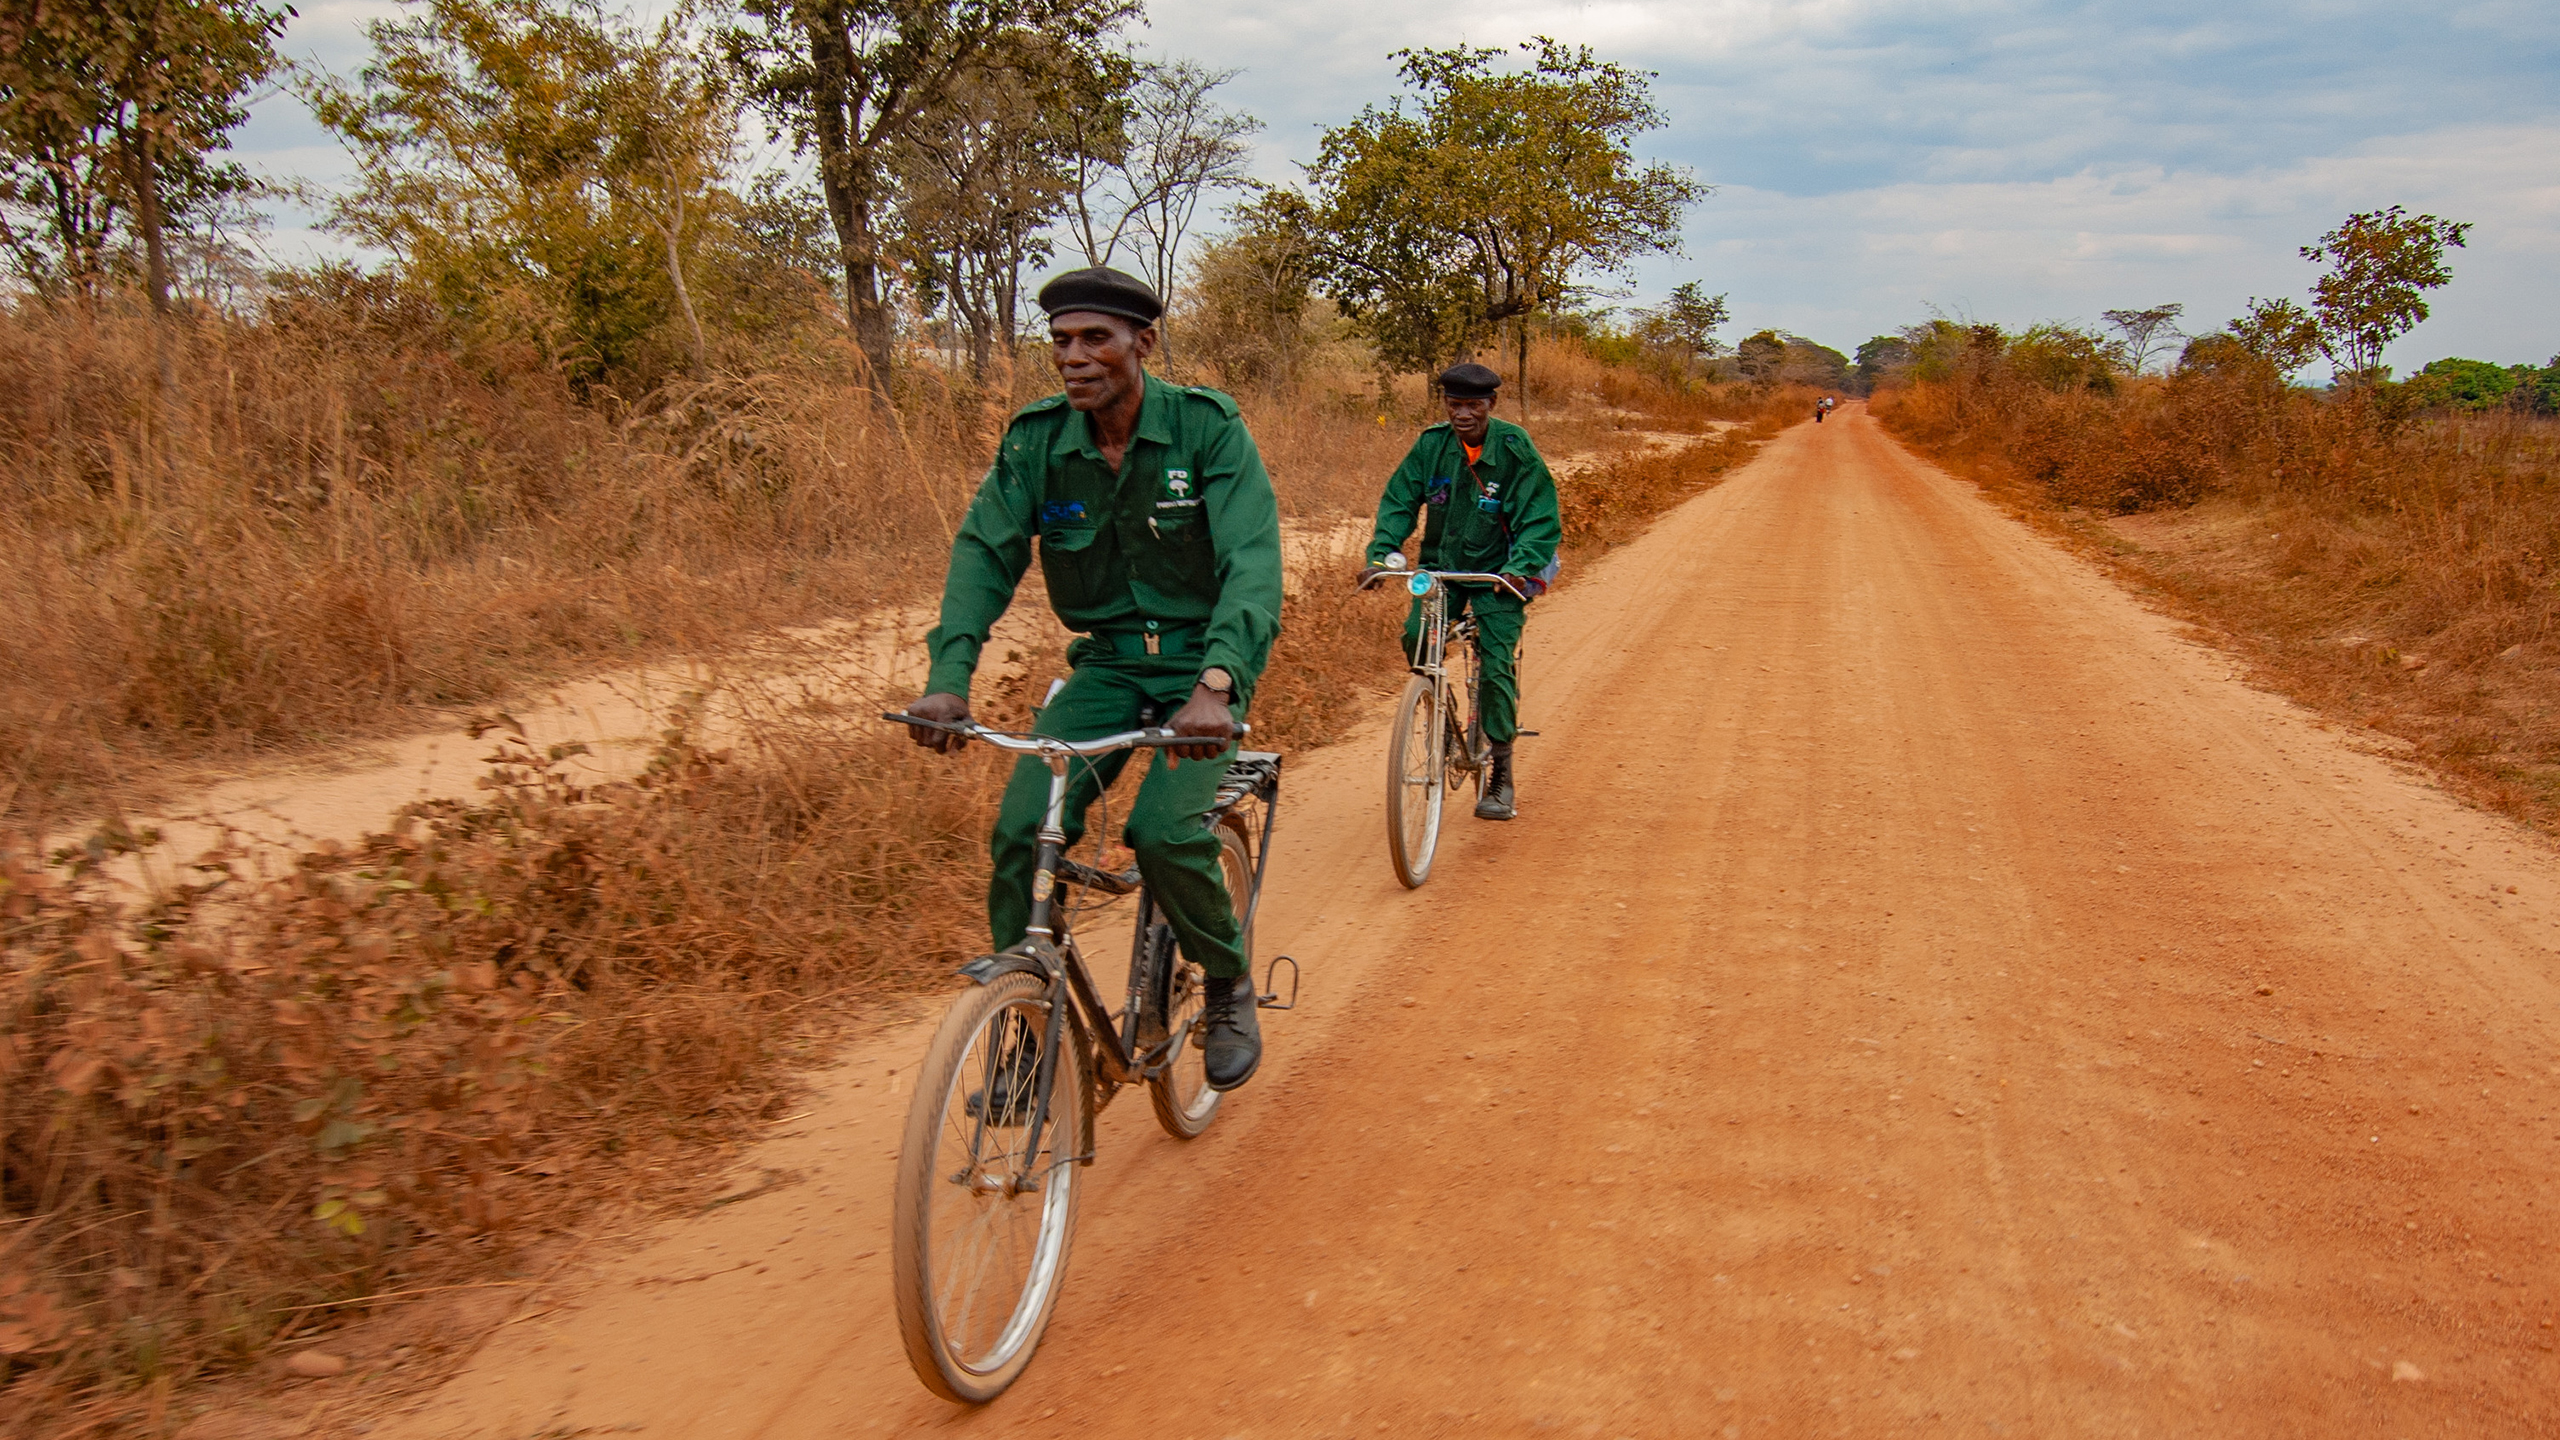 Community Forest Rangers travelled over 950 km in just four months to assess one third of all participating farmers in the Luanshya district. © Ruben Foquet, WeForest